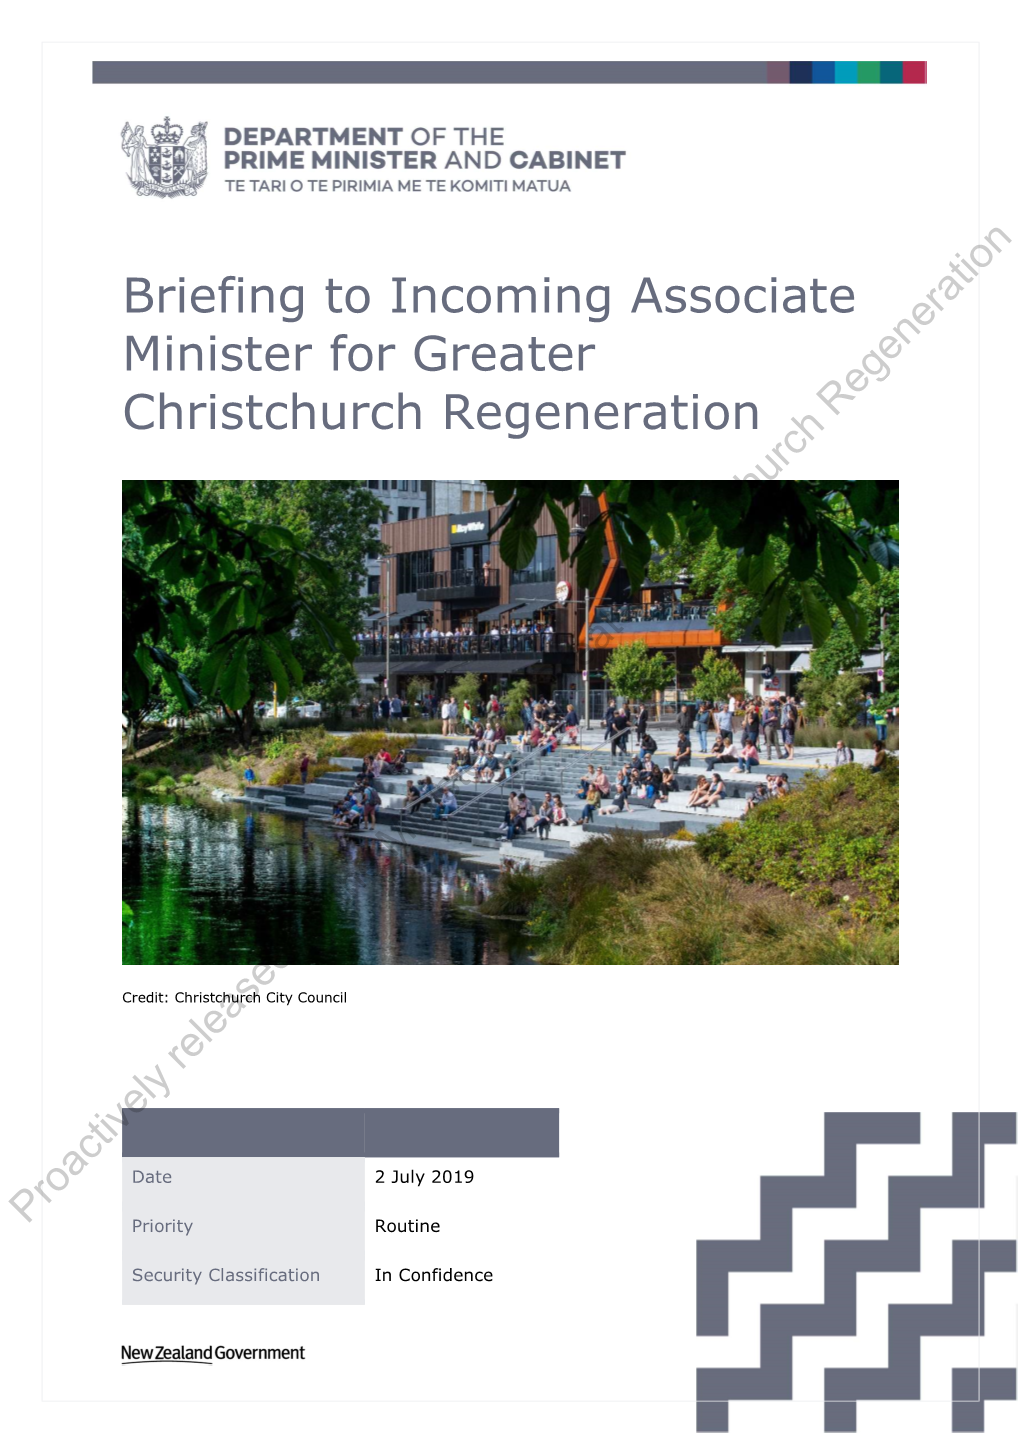 Briefing to Incoming Associate Minister for Greater Christchurch Regeneration